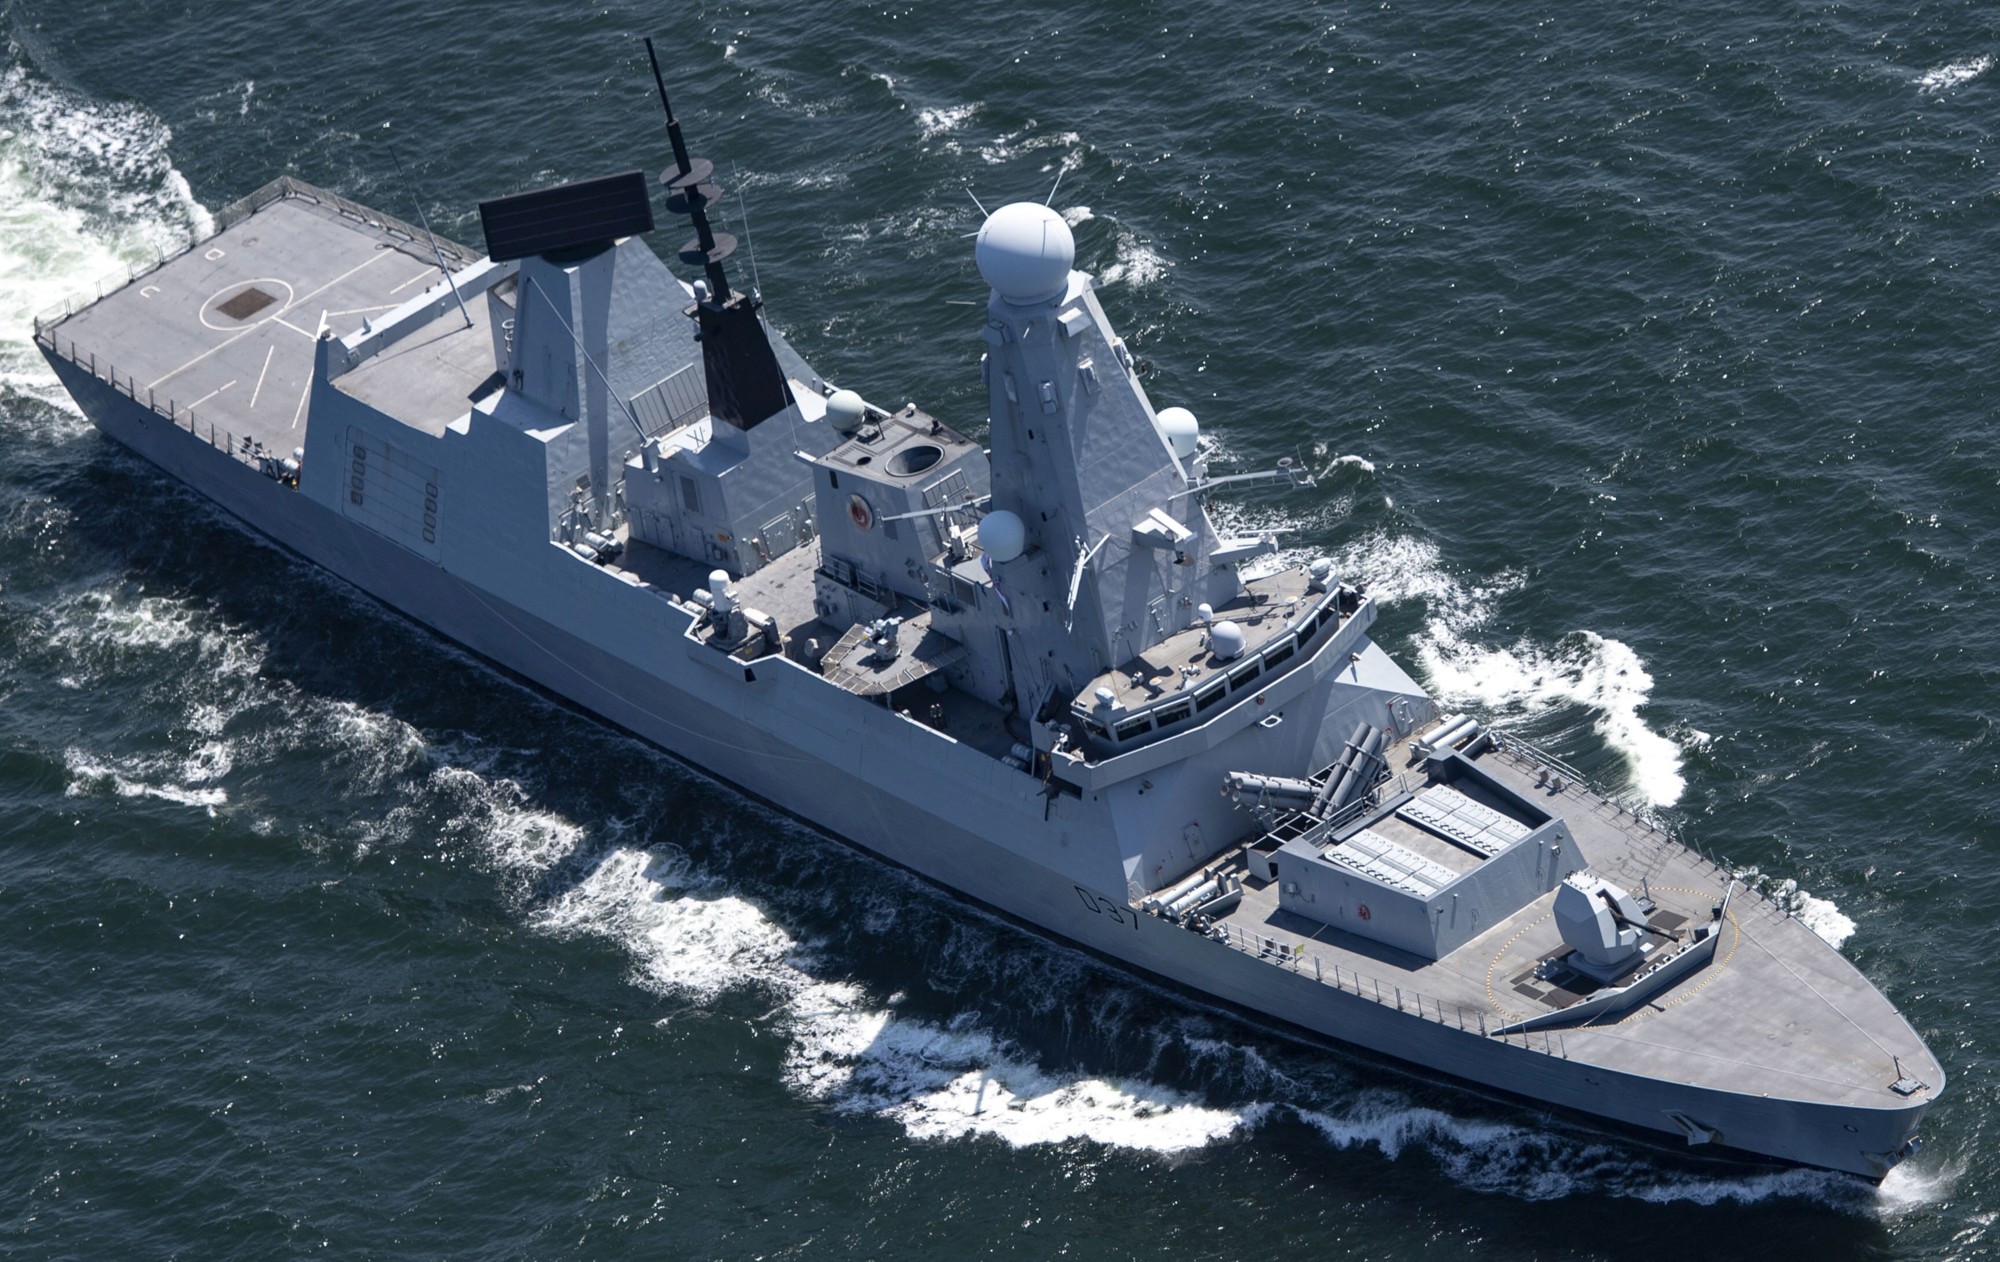 d37 hms duncan d-37 type 45 daring class guided missile destroyer ddg royal navy sea viper 20